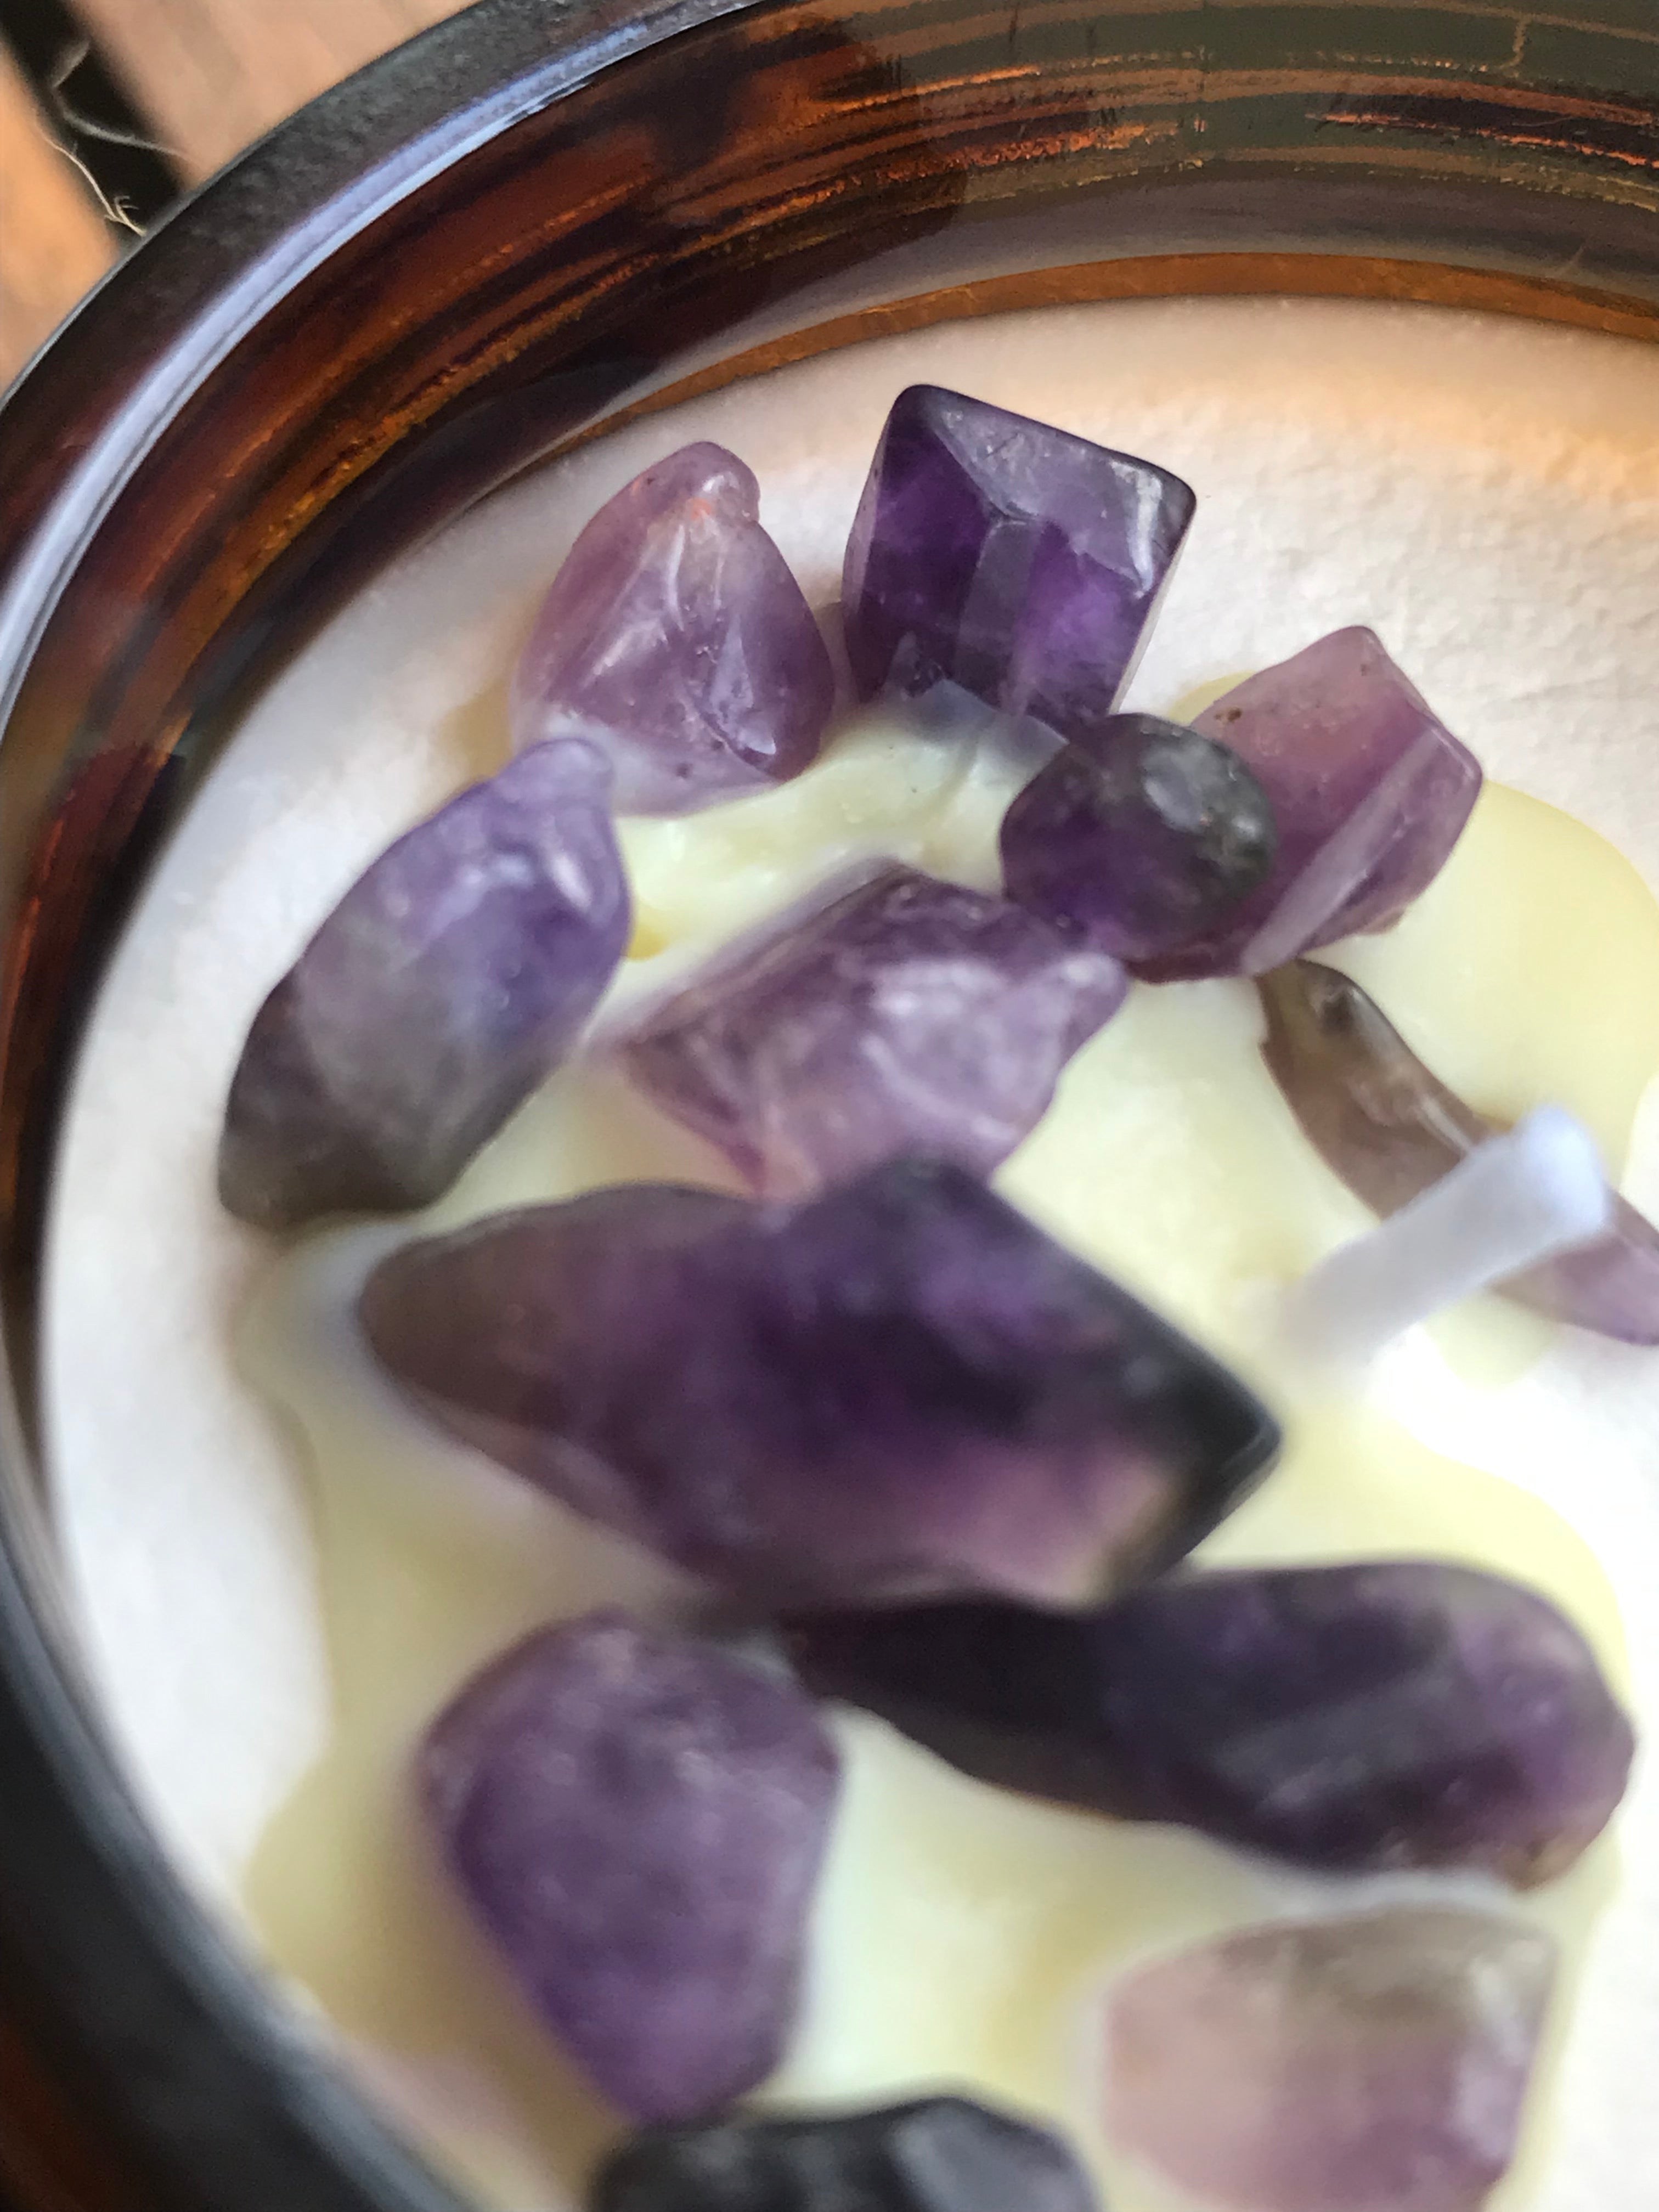 Aroma Candle with Crystals (Amethyst)